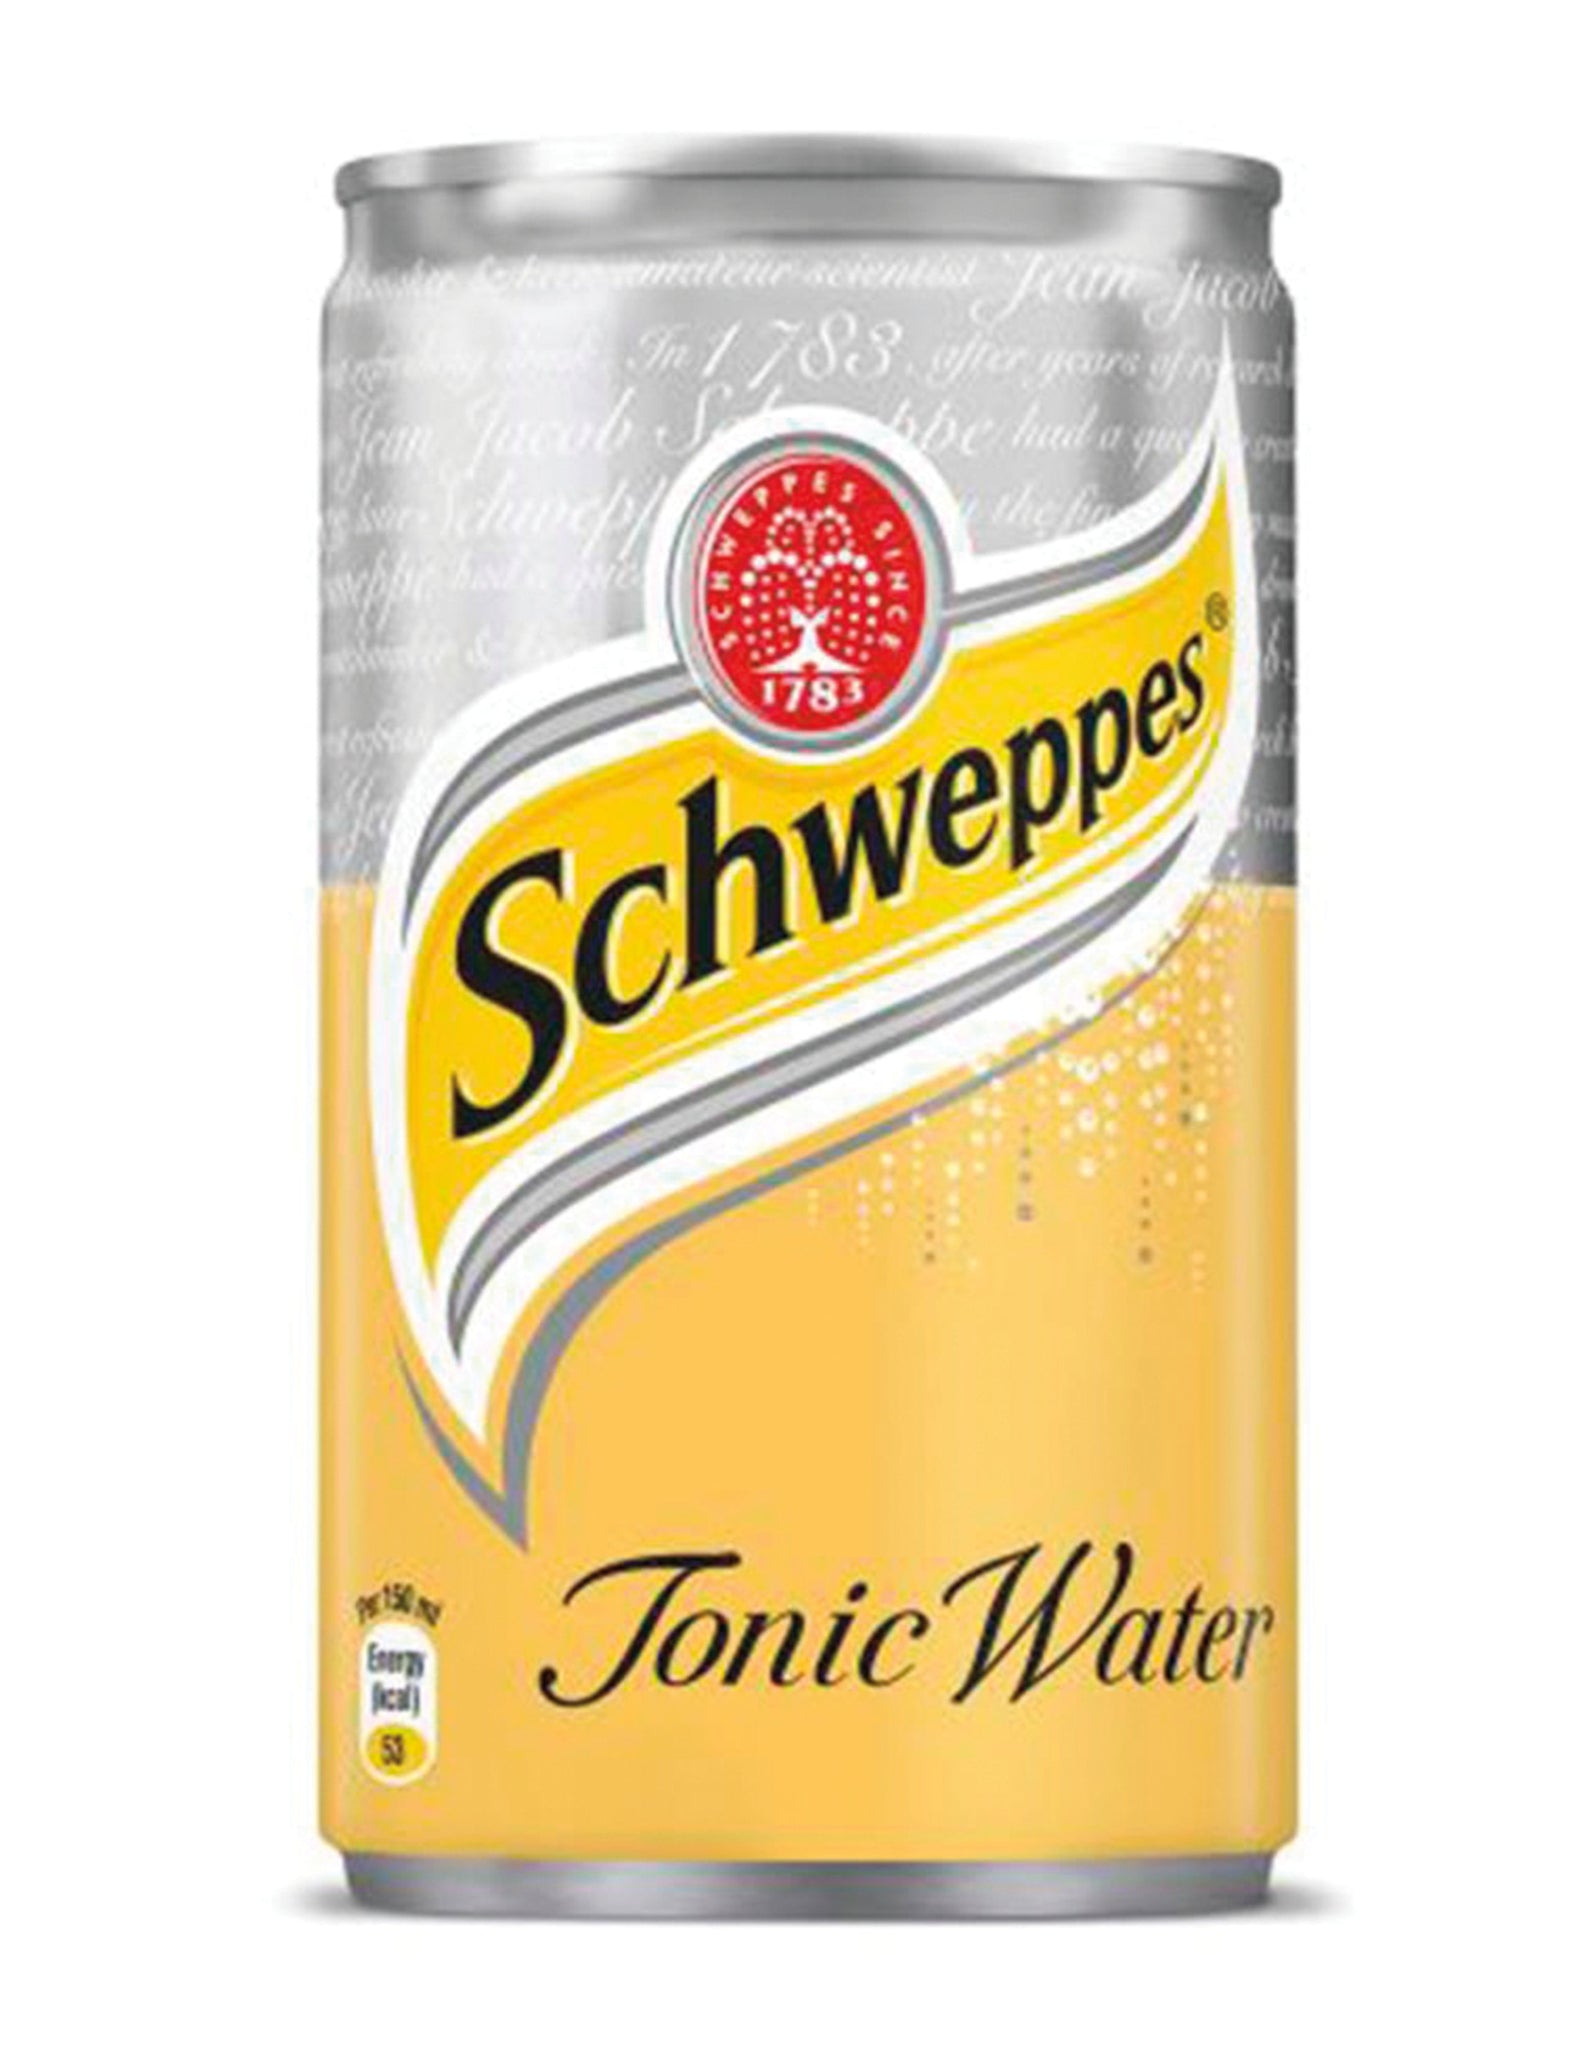 tha>Schweppes tonic water 12 x 330 ml cans